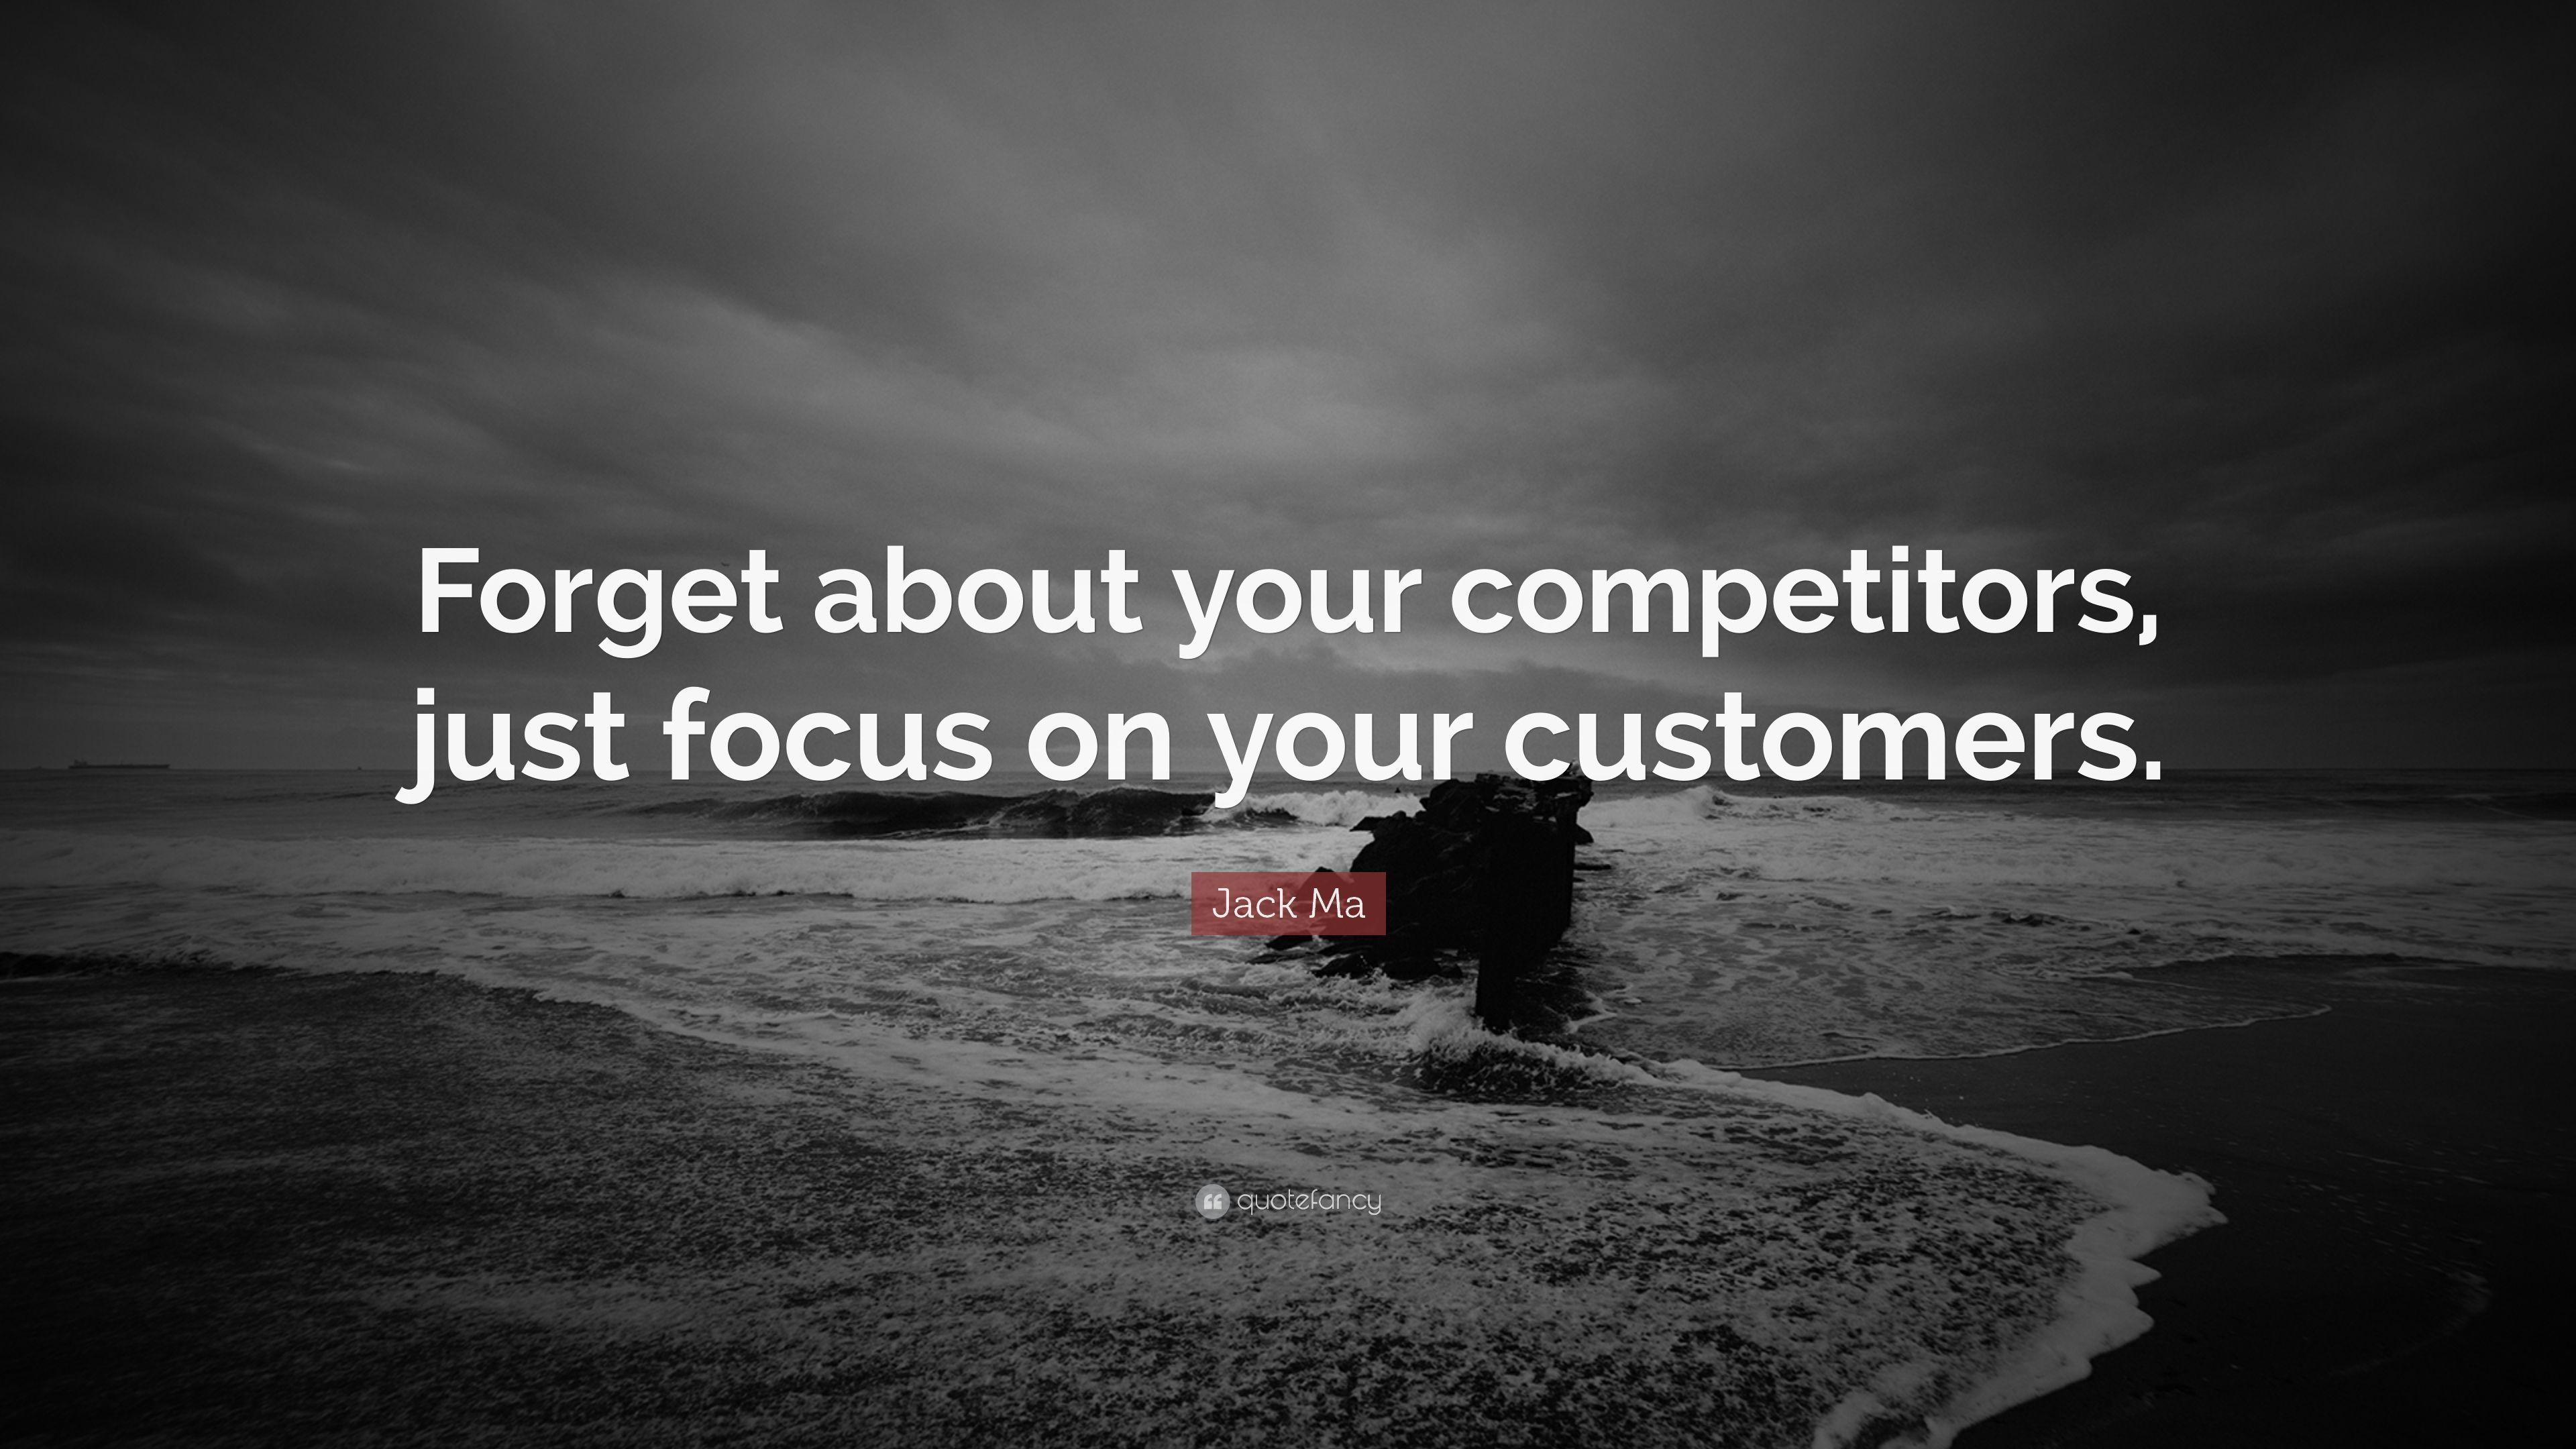 Jack Ma Quote: “Forget about your competitors, just focus on your